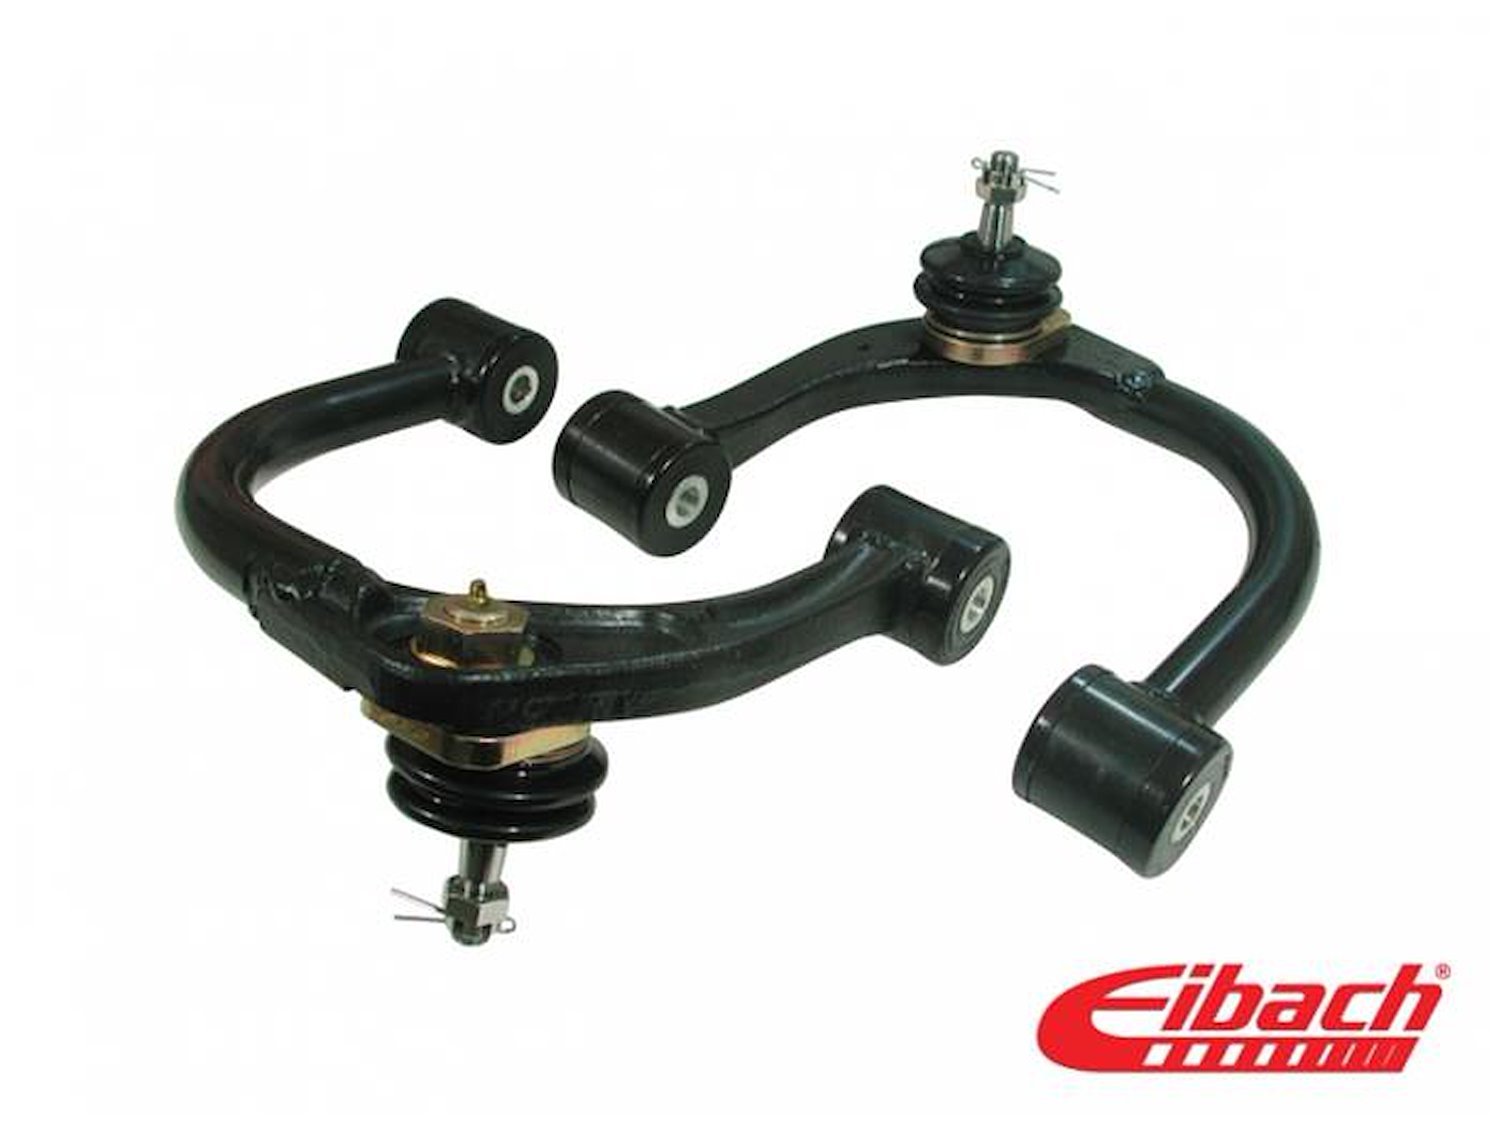 5.25480K PRO-ALIGNMENT Toyota Adjustable Front Upper Control Arm Kit